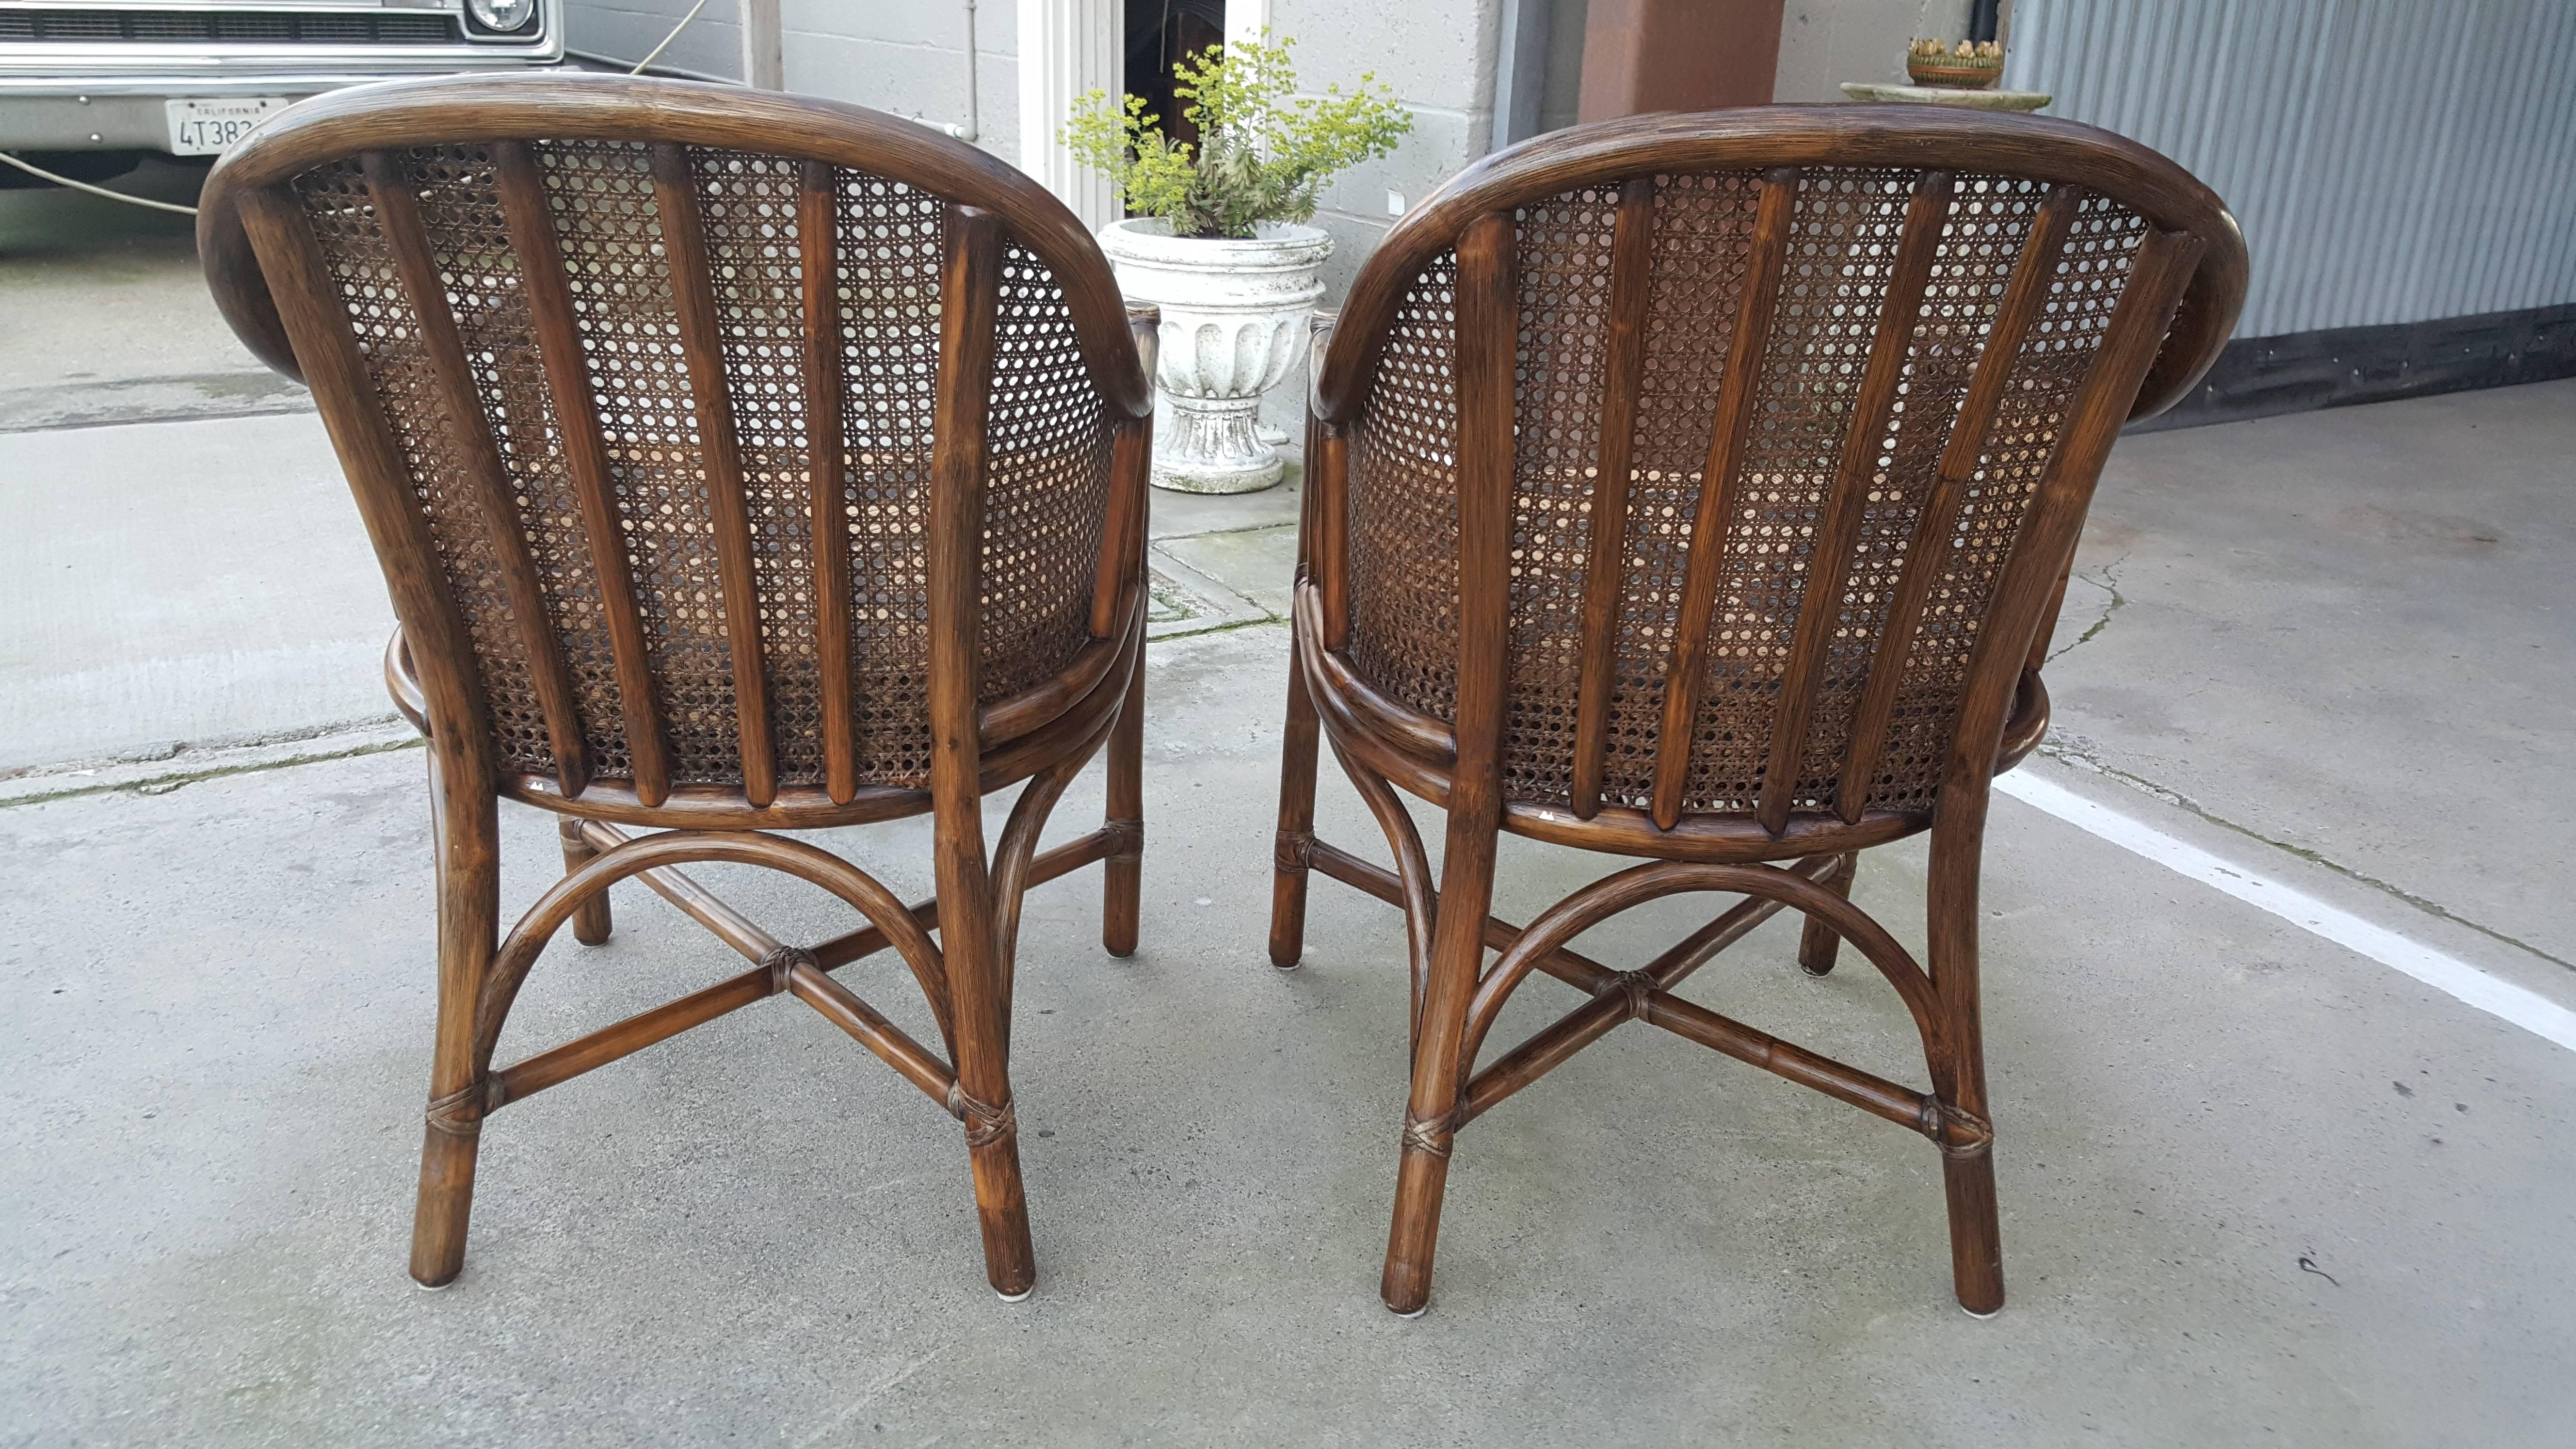 Nicely proportioned rattan and cane arm chairs by McGuire Furniture, San Francisco. Black and gold animal print fabric. Excellent vintage condition.